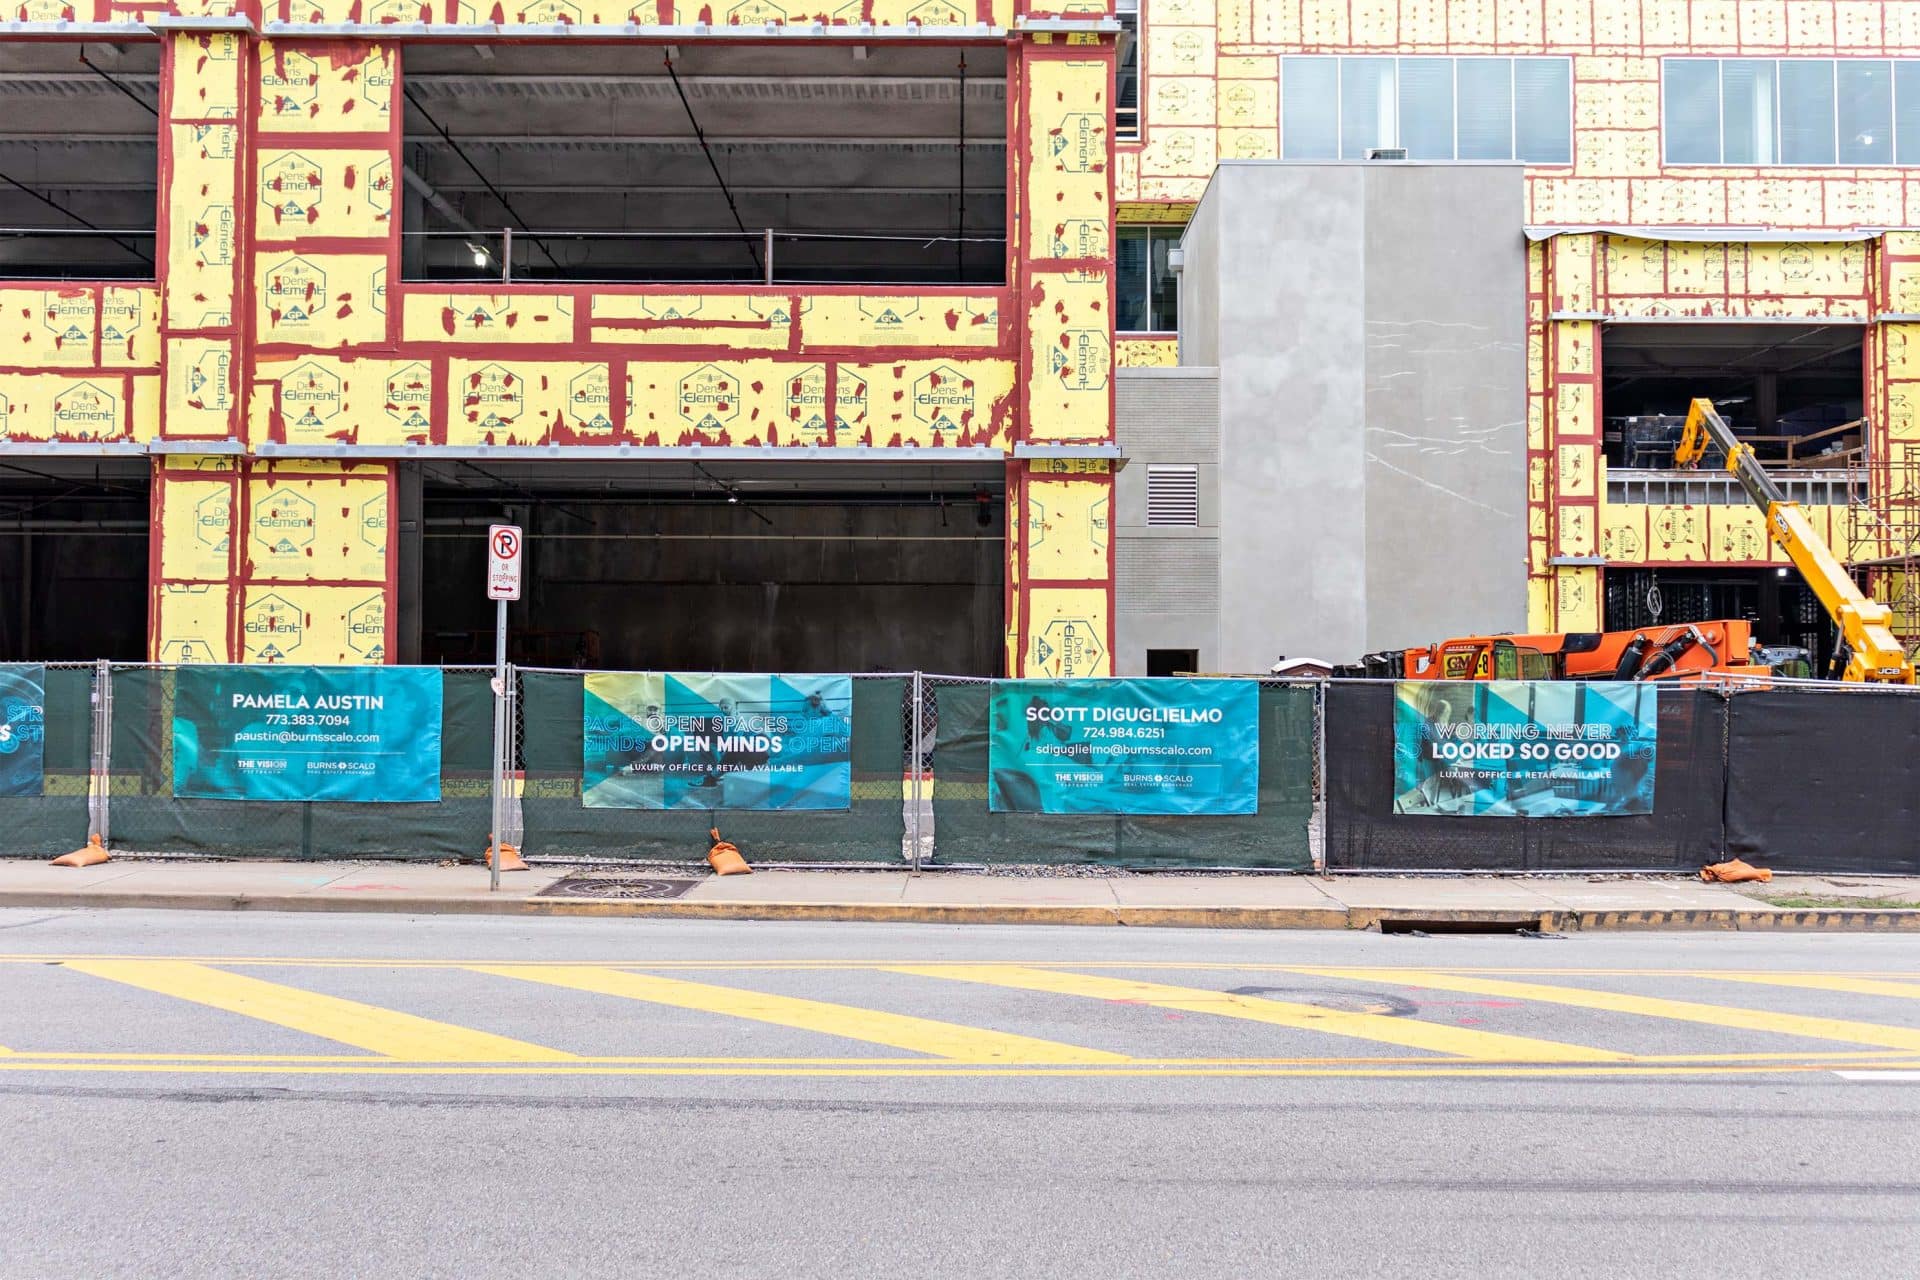 banners on fence in front of a building under construction